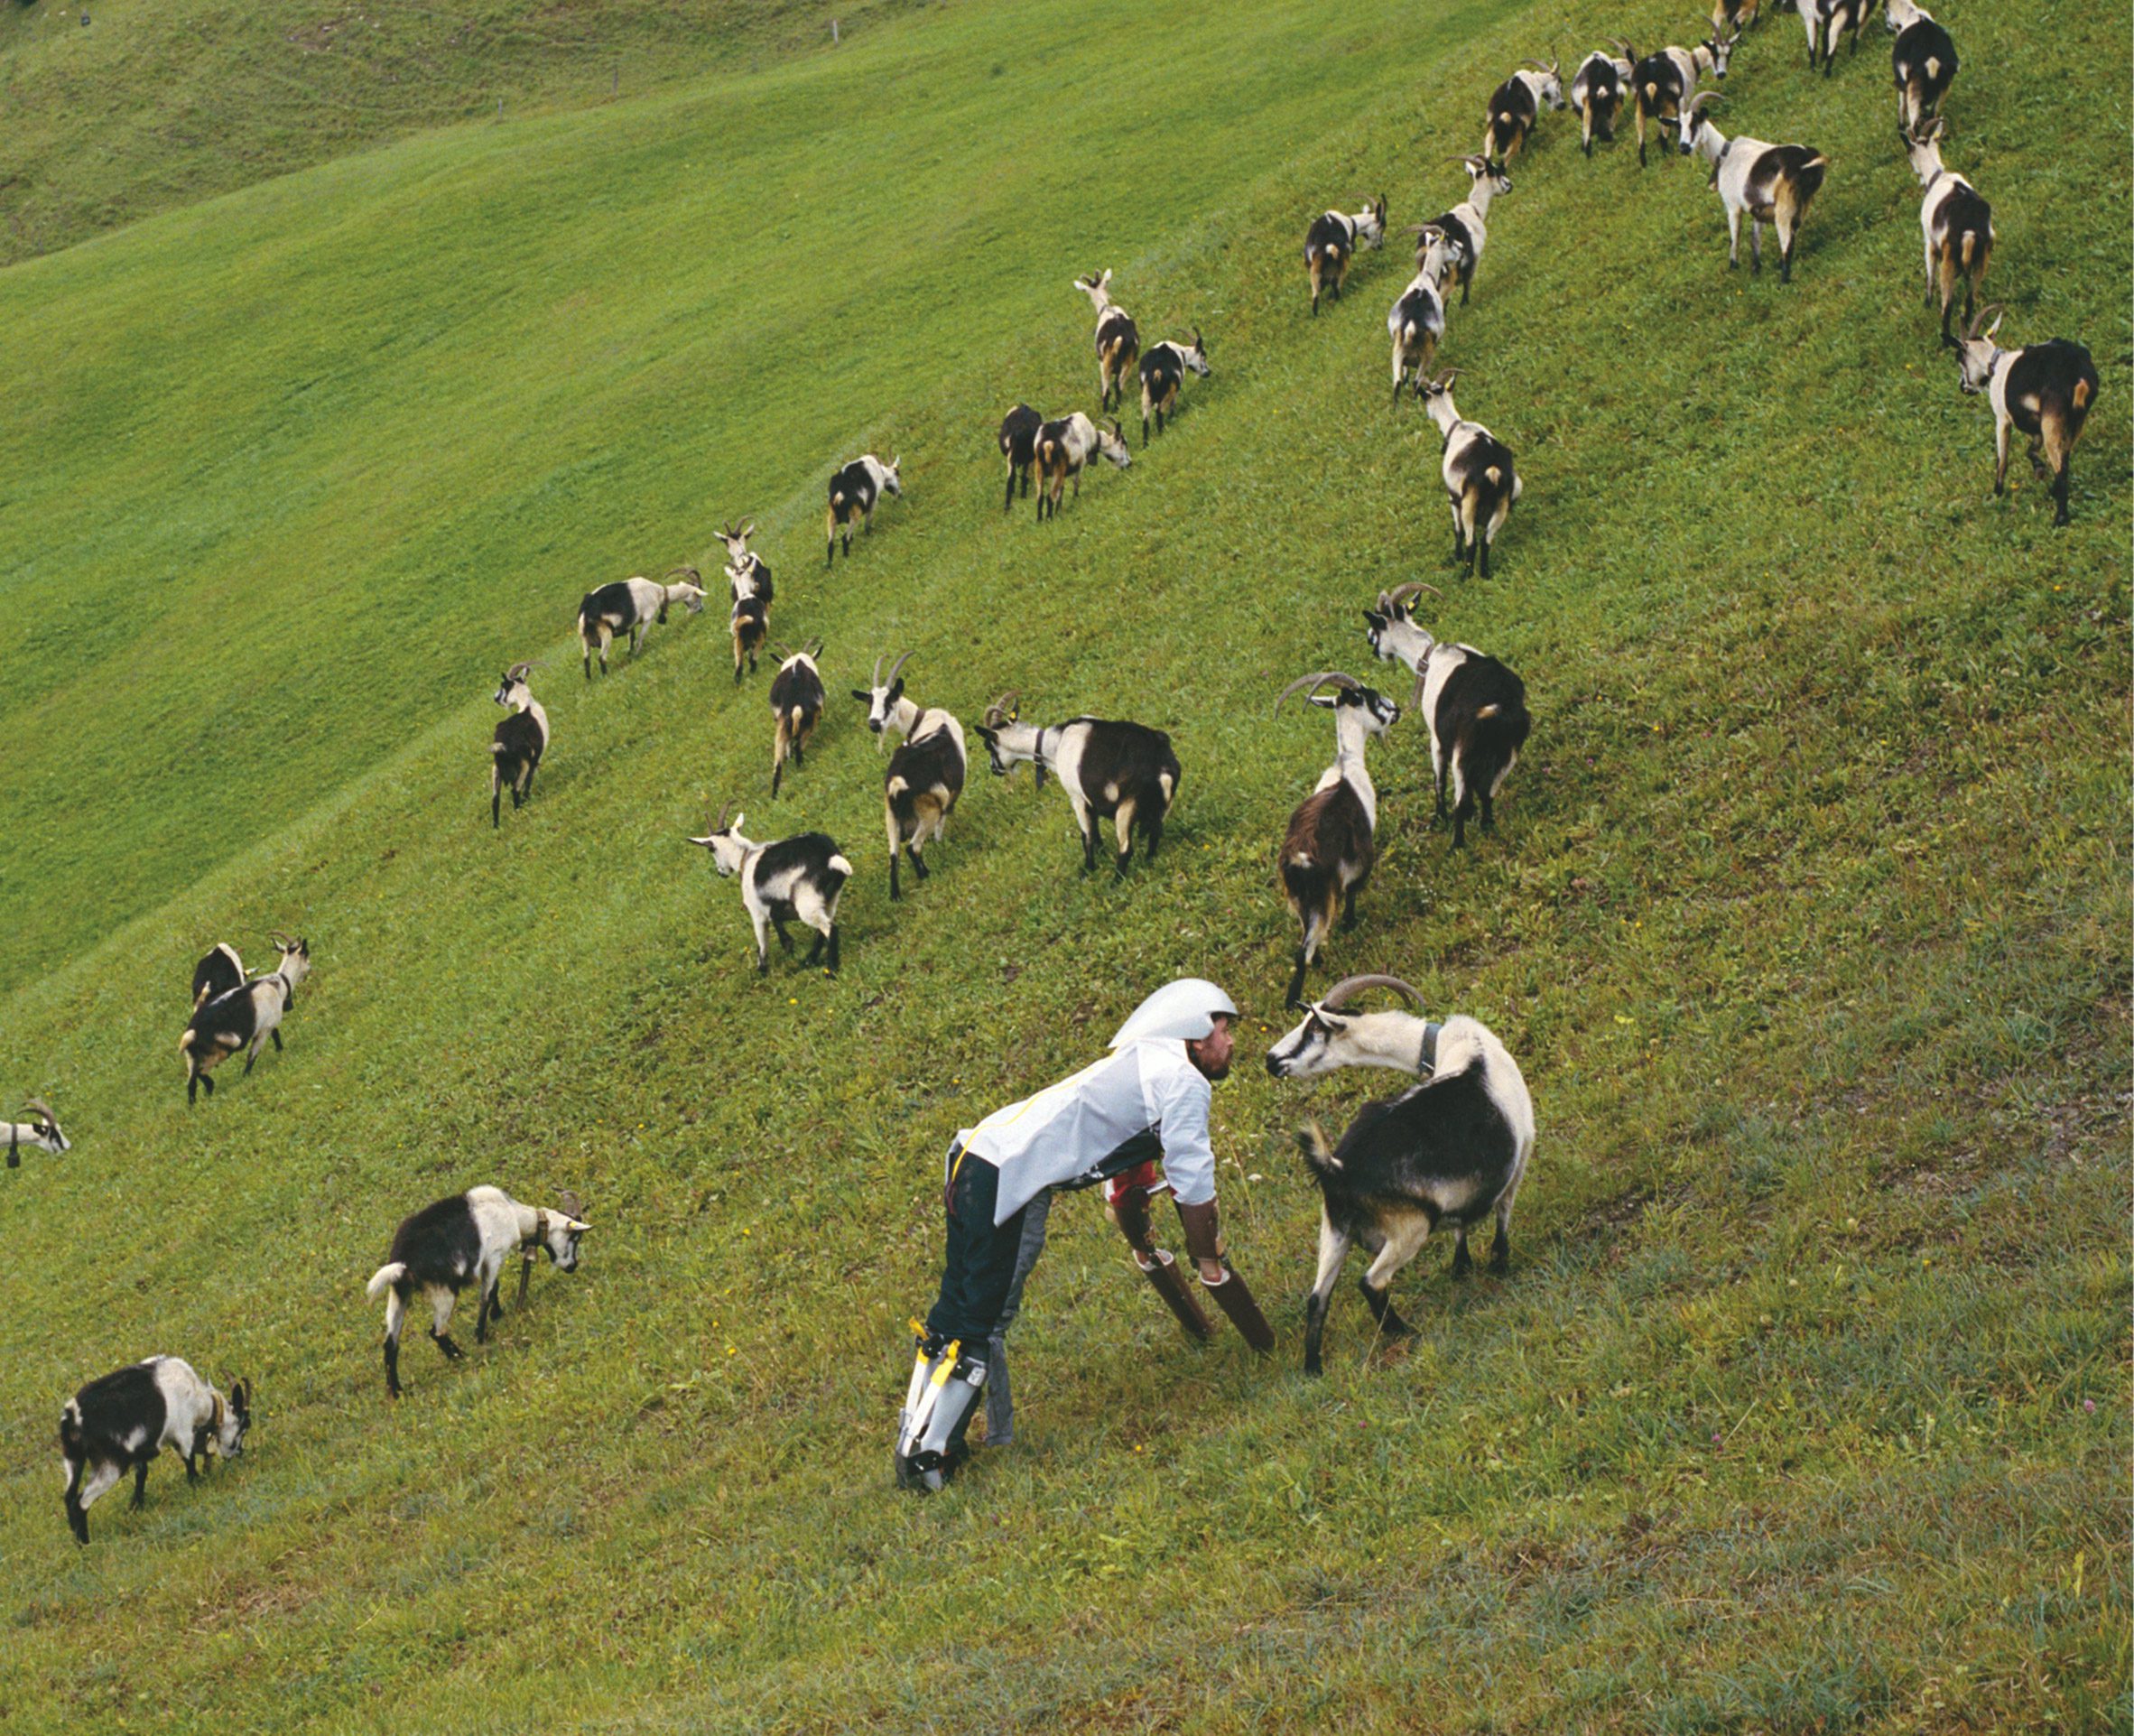 Photo of Thomas Thwaites wearing a contraption that enables him to walk on four legs in a goat-like stance as part of his GoatMan project. He stands within a flock of goats on a steep hill and is appearing to converse with one of them